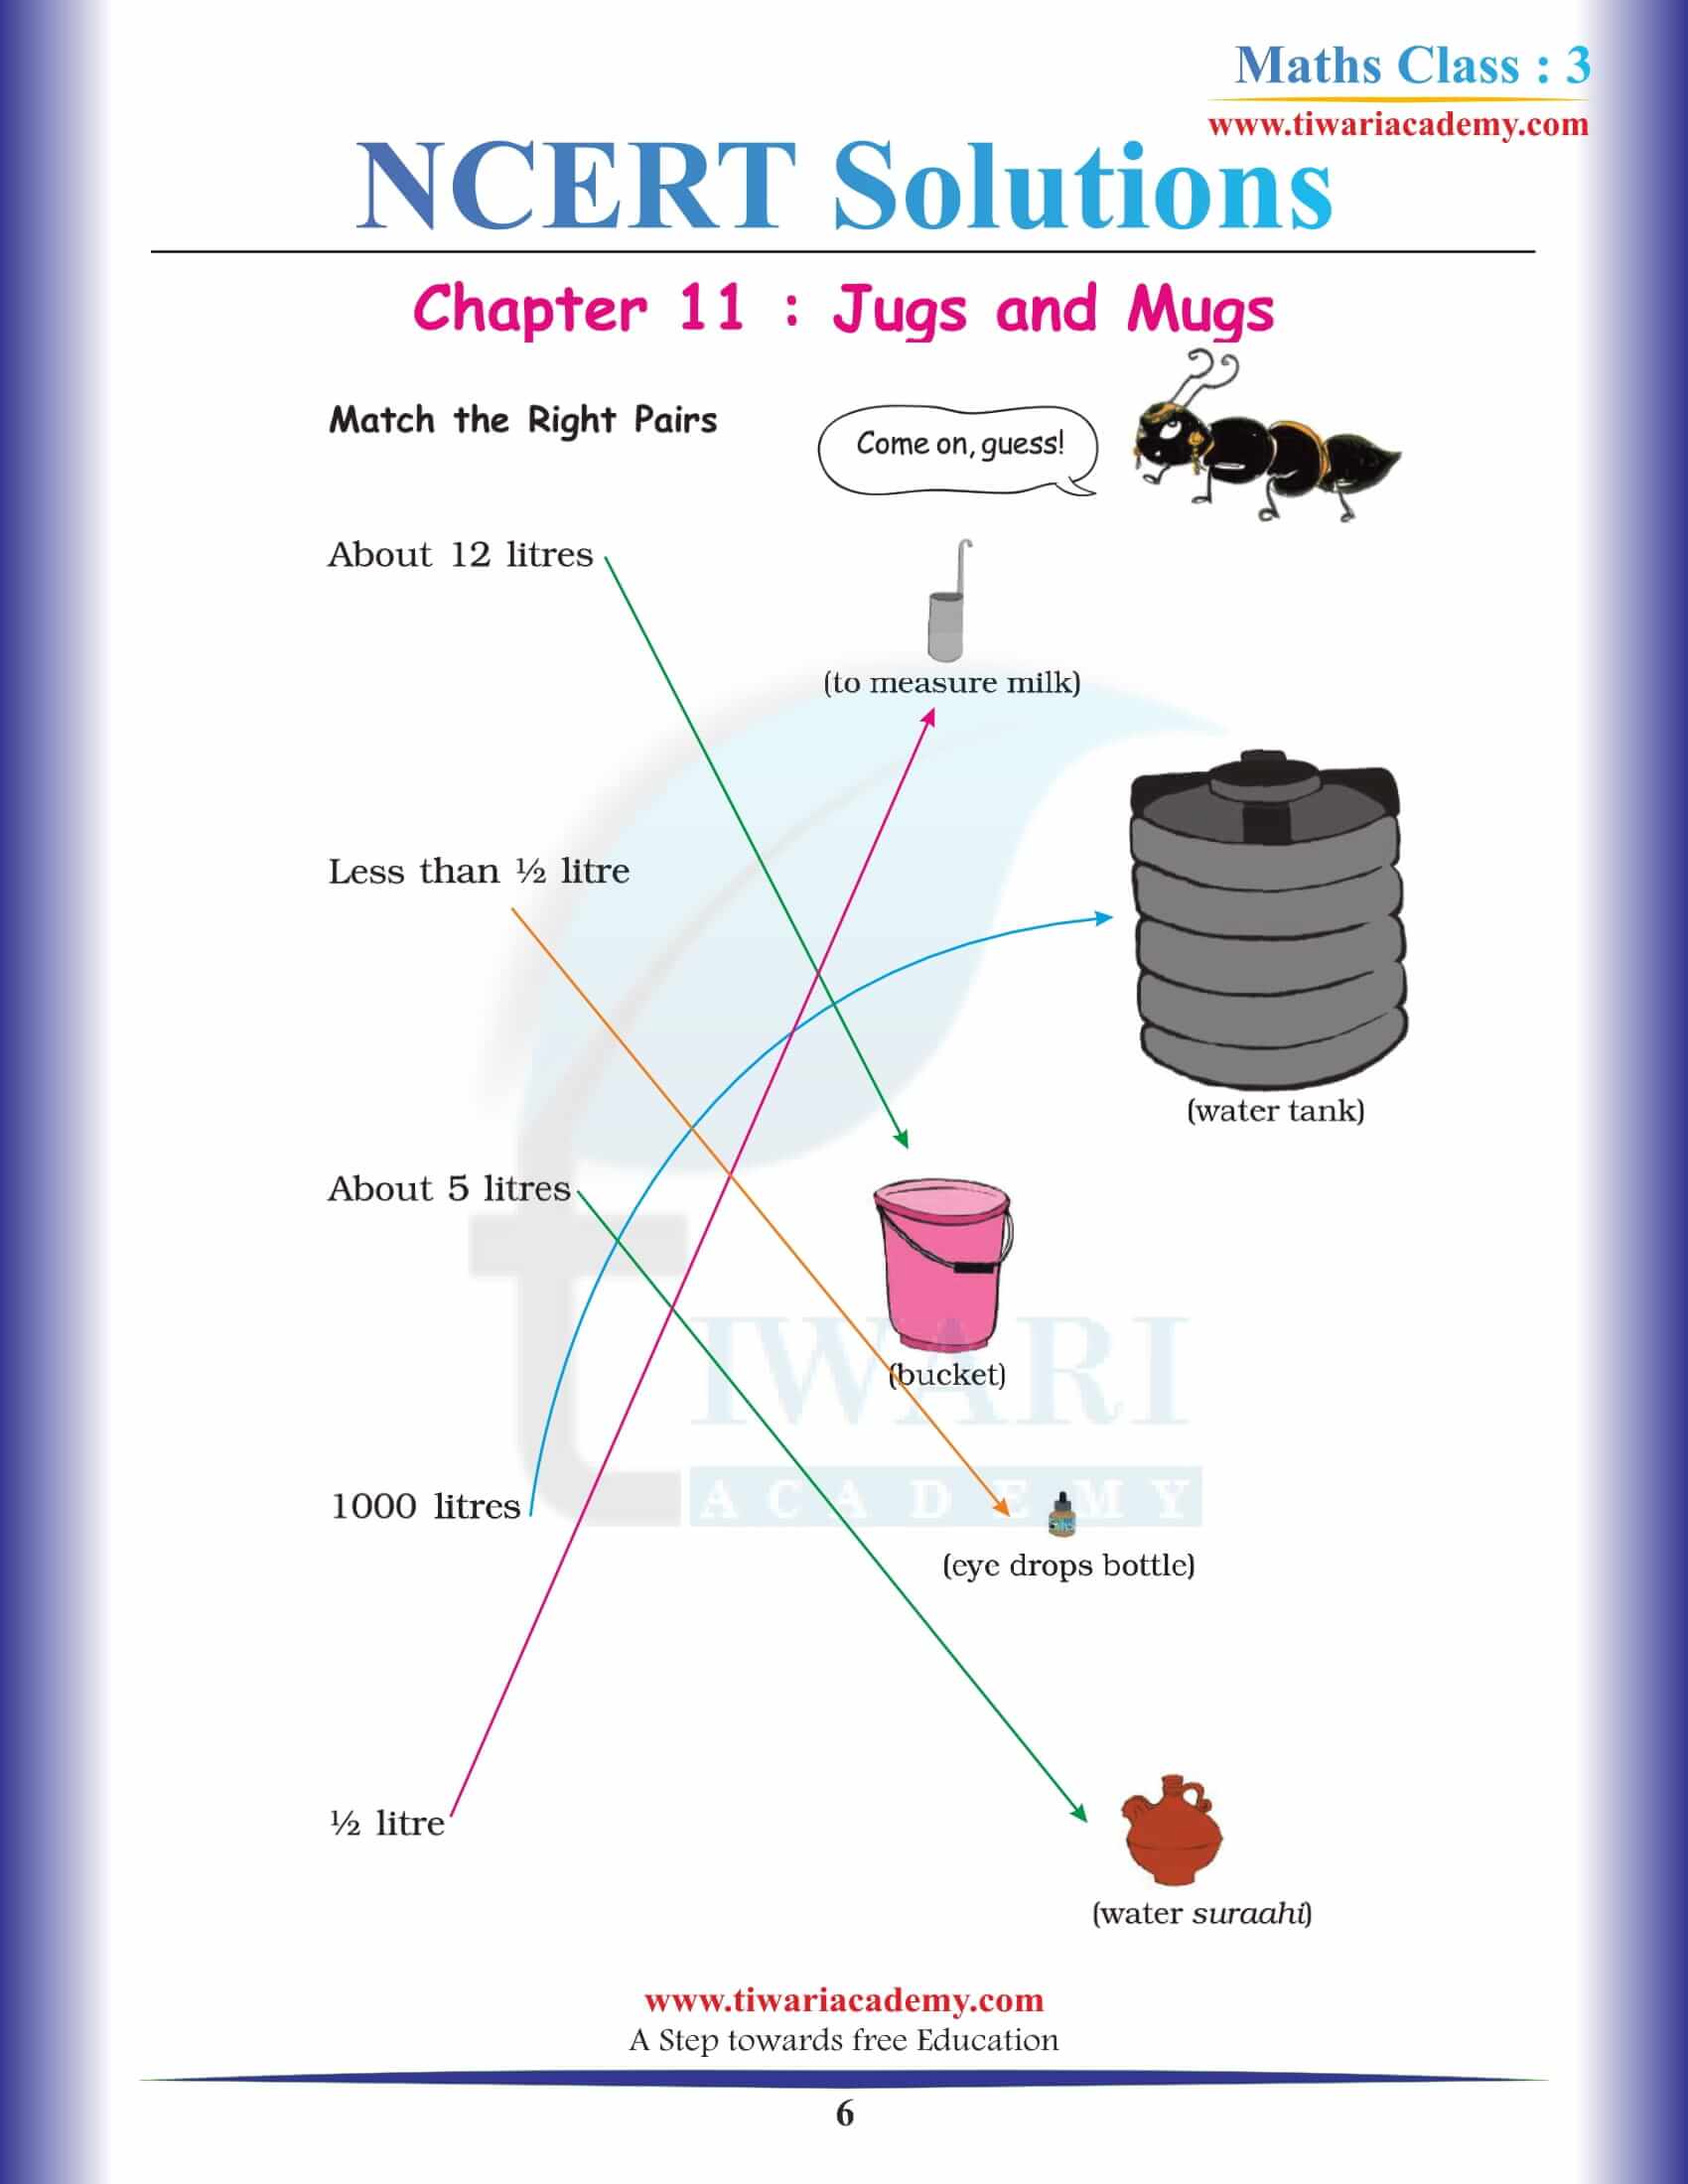 NCERT Solutions for Class 3 Maths Chapter 11 in English Medium